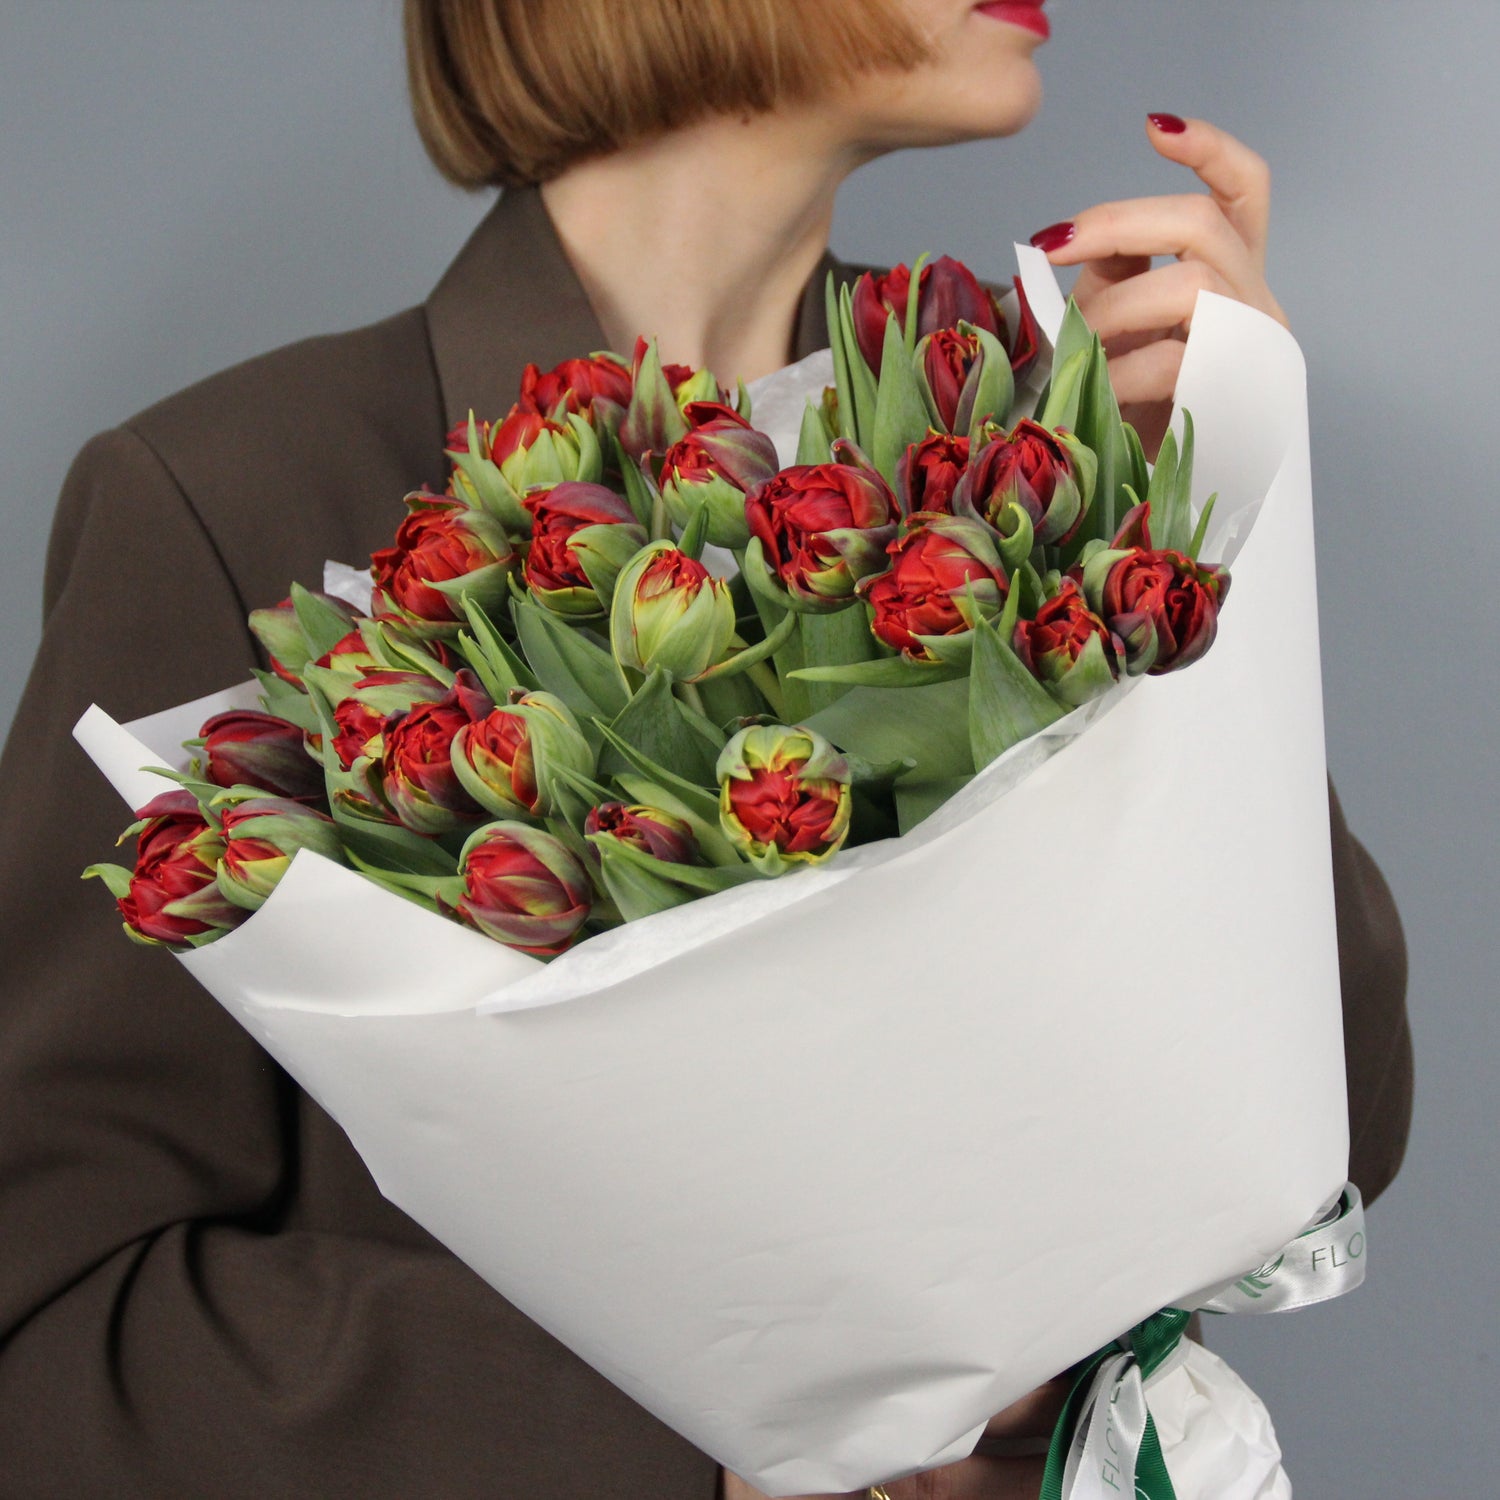 Genoa flower delivery red tulips